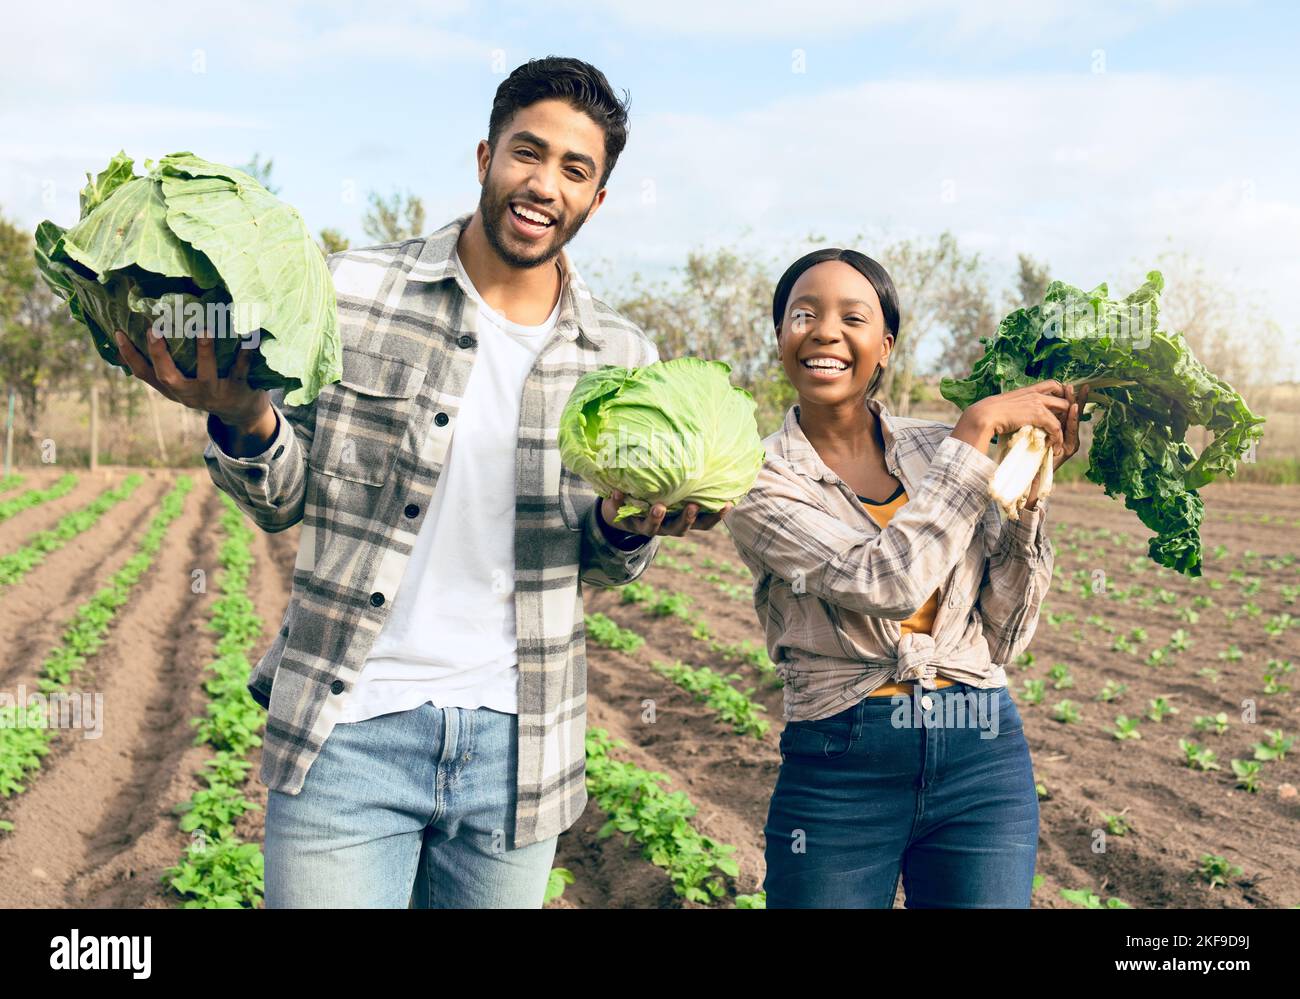 Farming, harvest and interracial couple with vegetables from their sustainable, agro and agriculture farm. Sustainability, small business and portrait Stock Photo